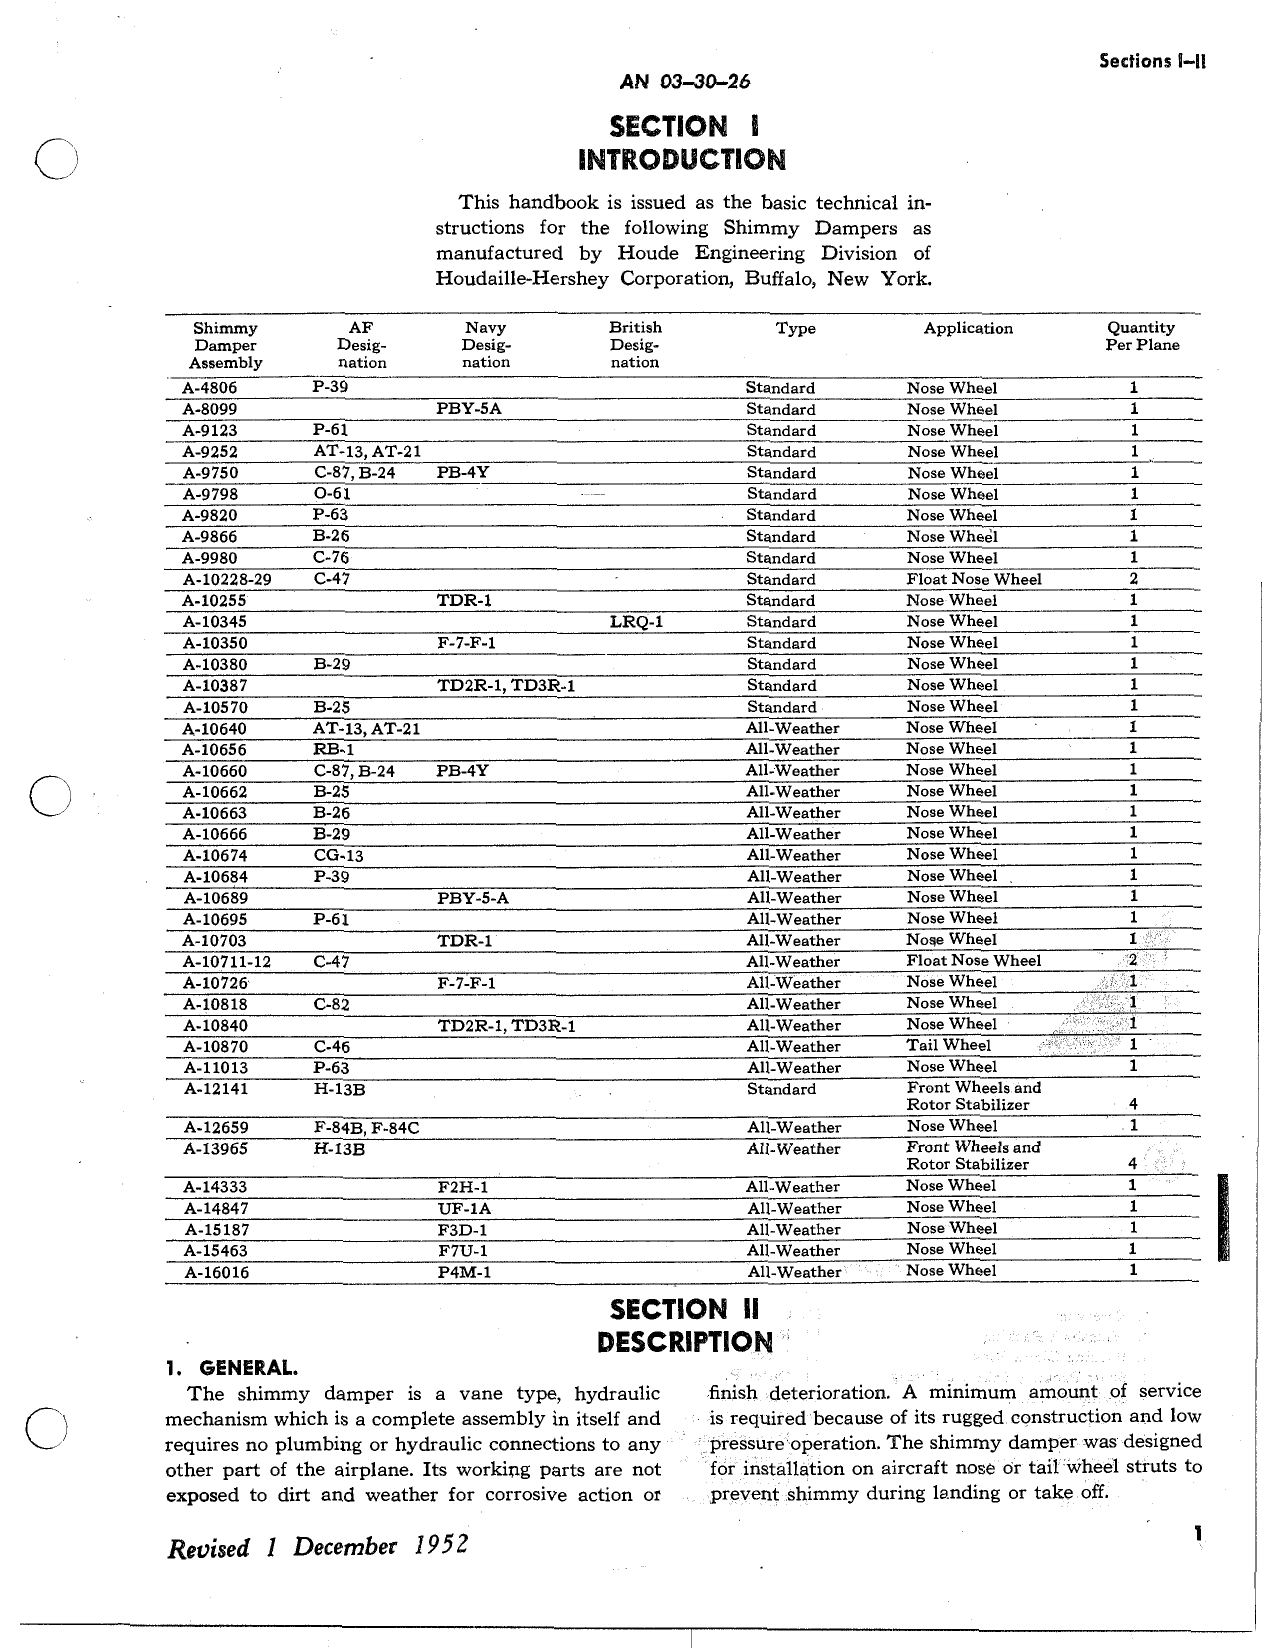 Sample page 5 from AirCorps Library document: Technical Manual - Operation, Service & Overhaul Instructions - Shimmy Dampers